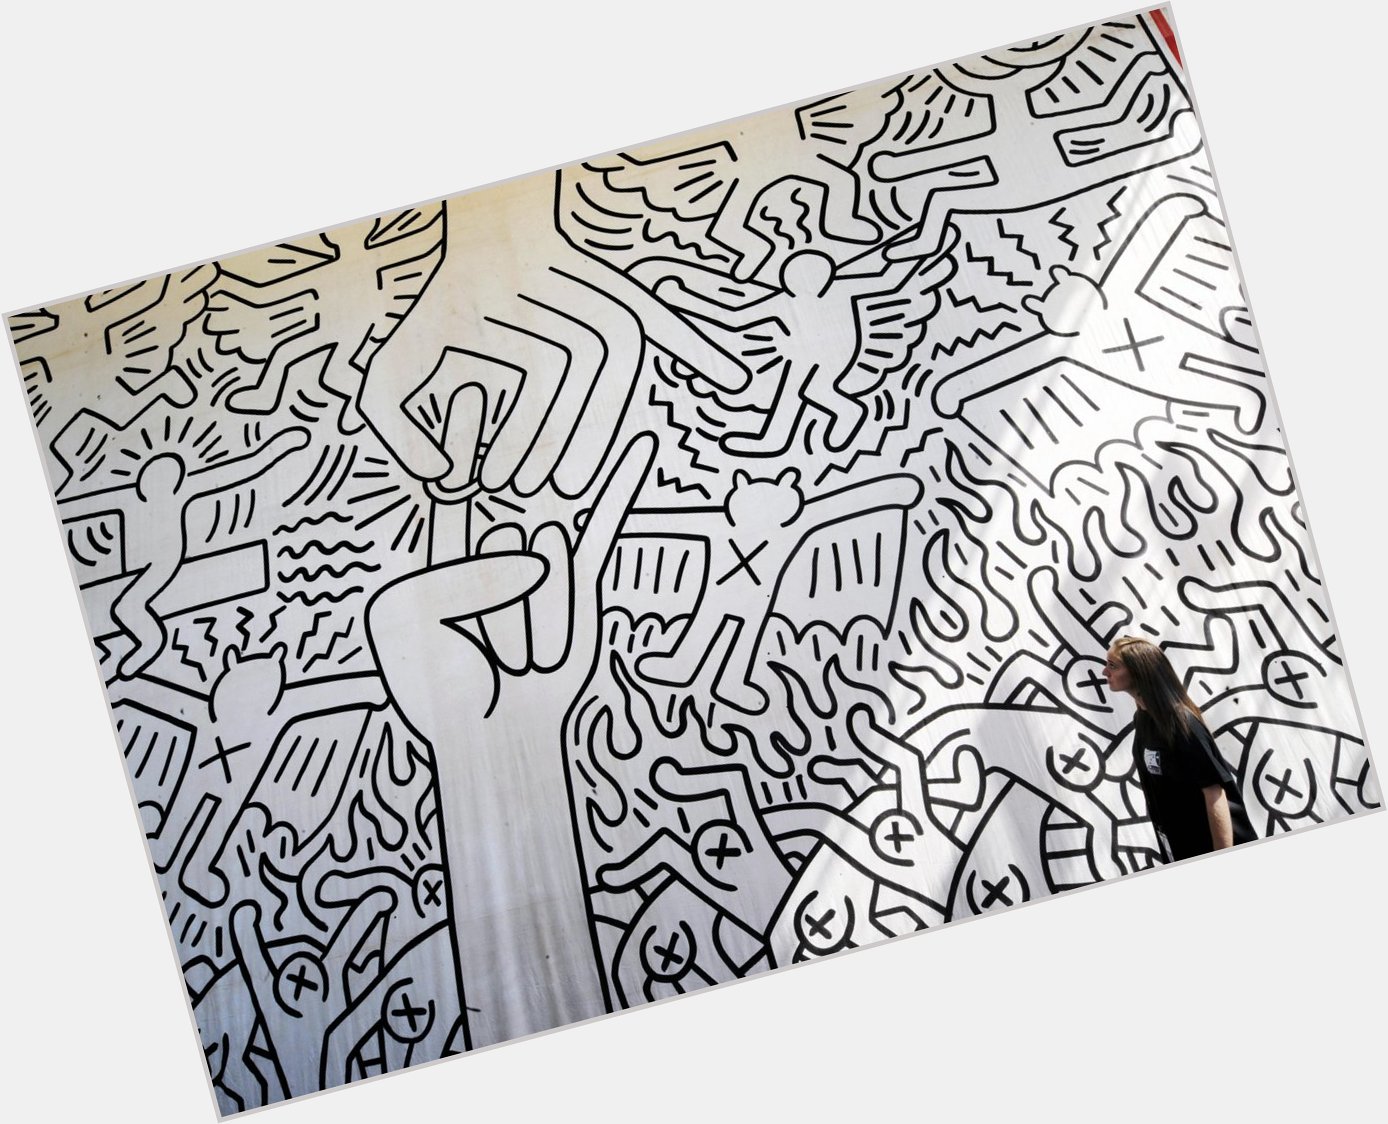 Happy Birthday to the late, great Keith Haring, an art icon 